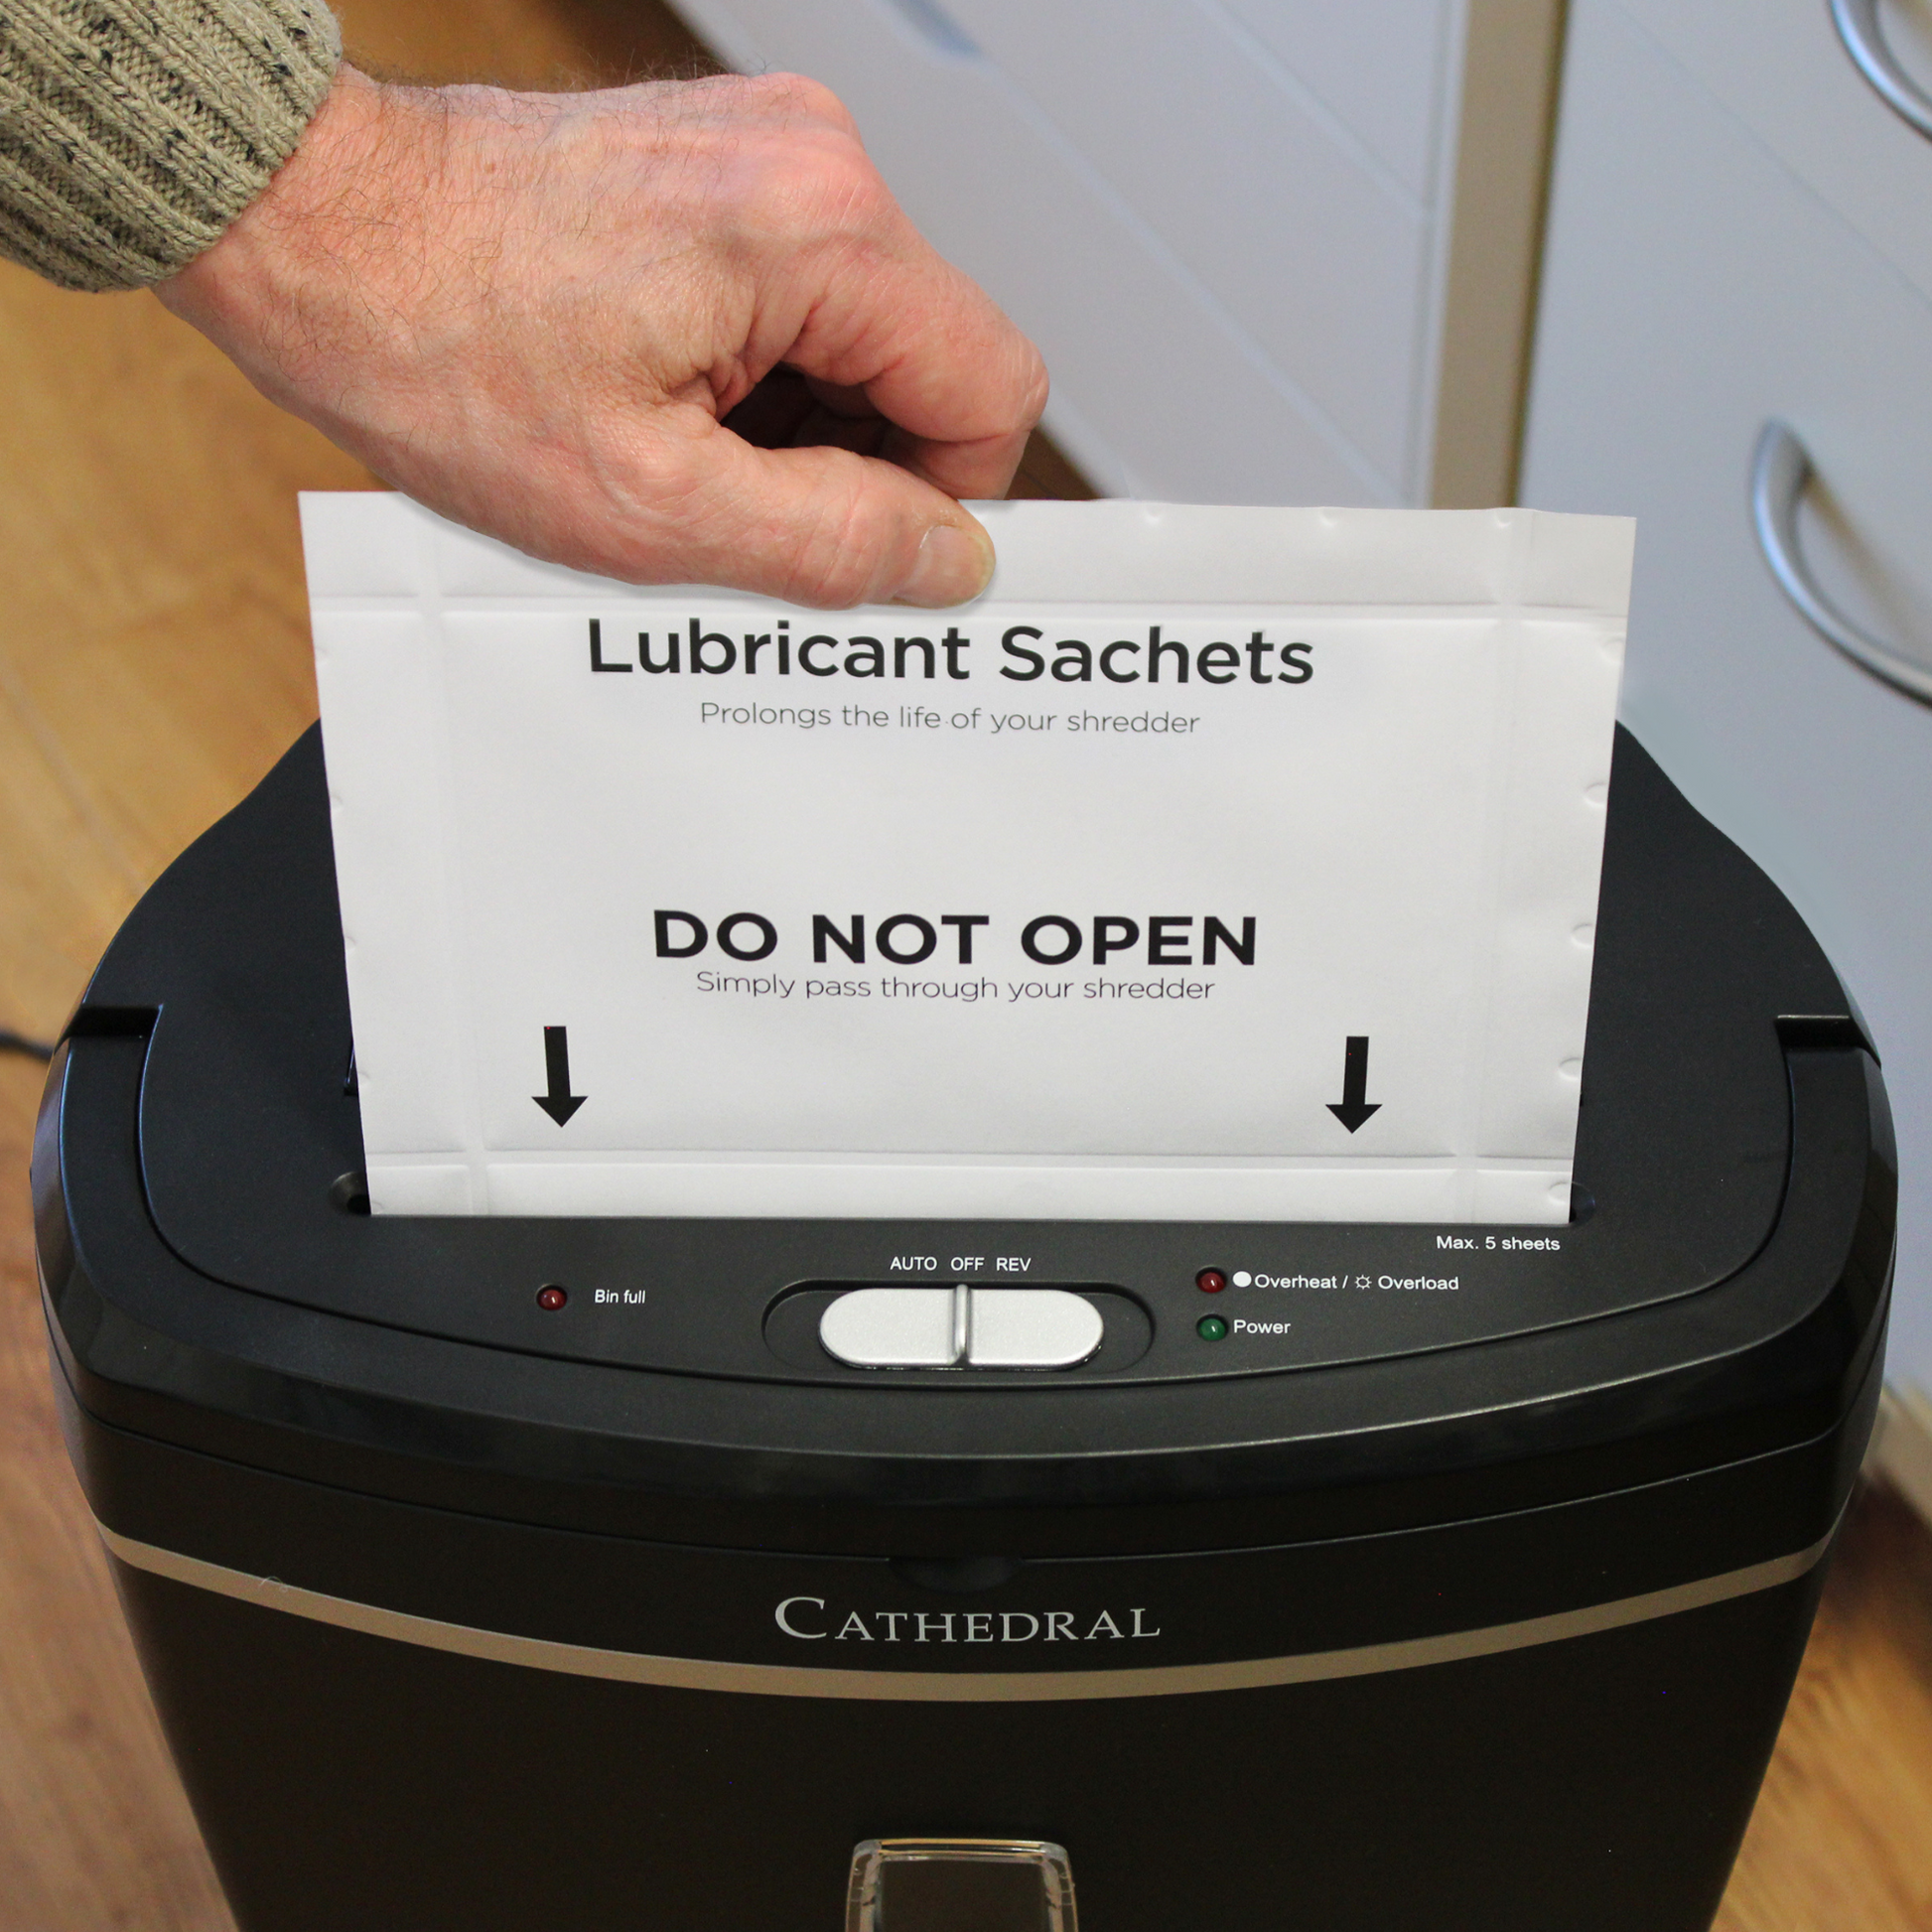 A person's hand is holding a lubricant sachet labeled 'DO NOT OPEN - Simply pass through your shredder' above a black paper shredder that reads 'Cathedral' on the front. The sachet is intended to prolong the life of the shredder.